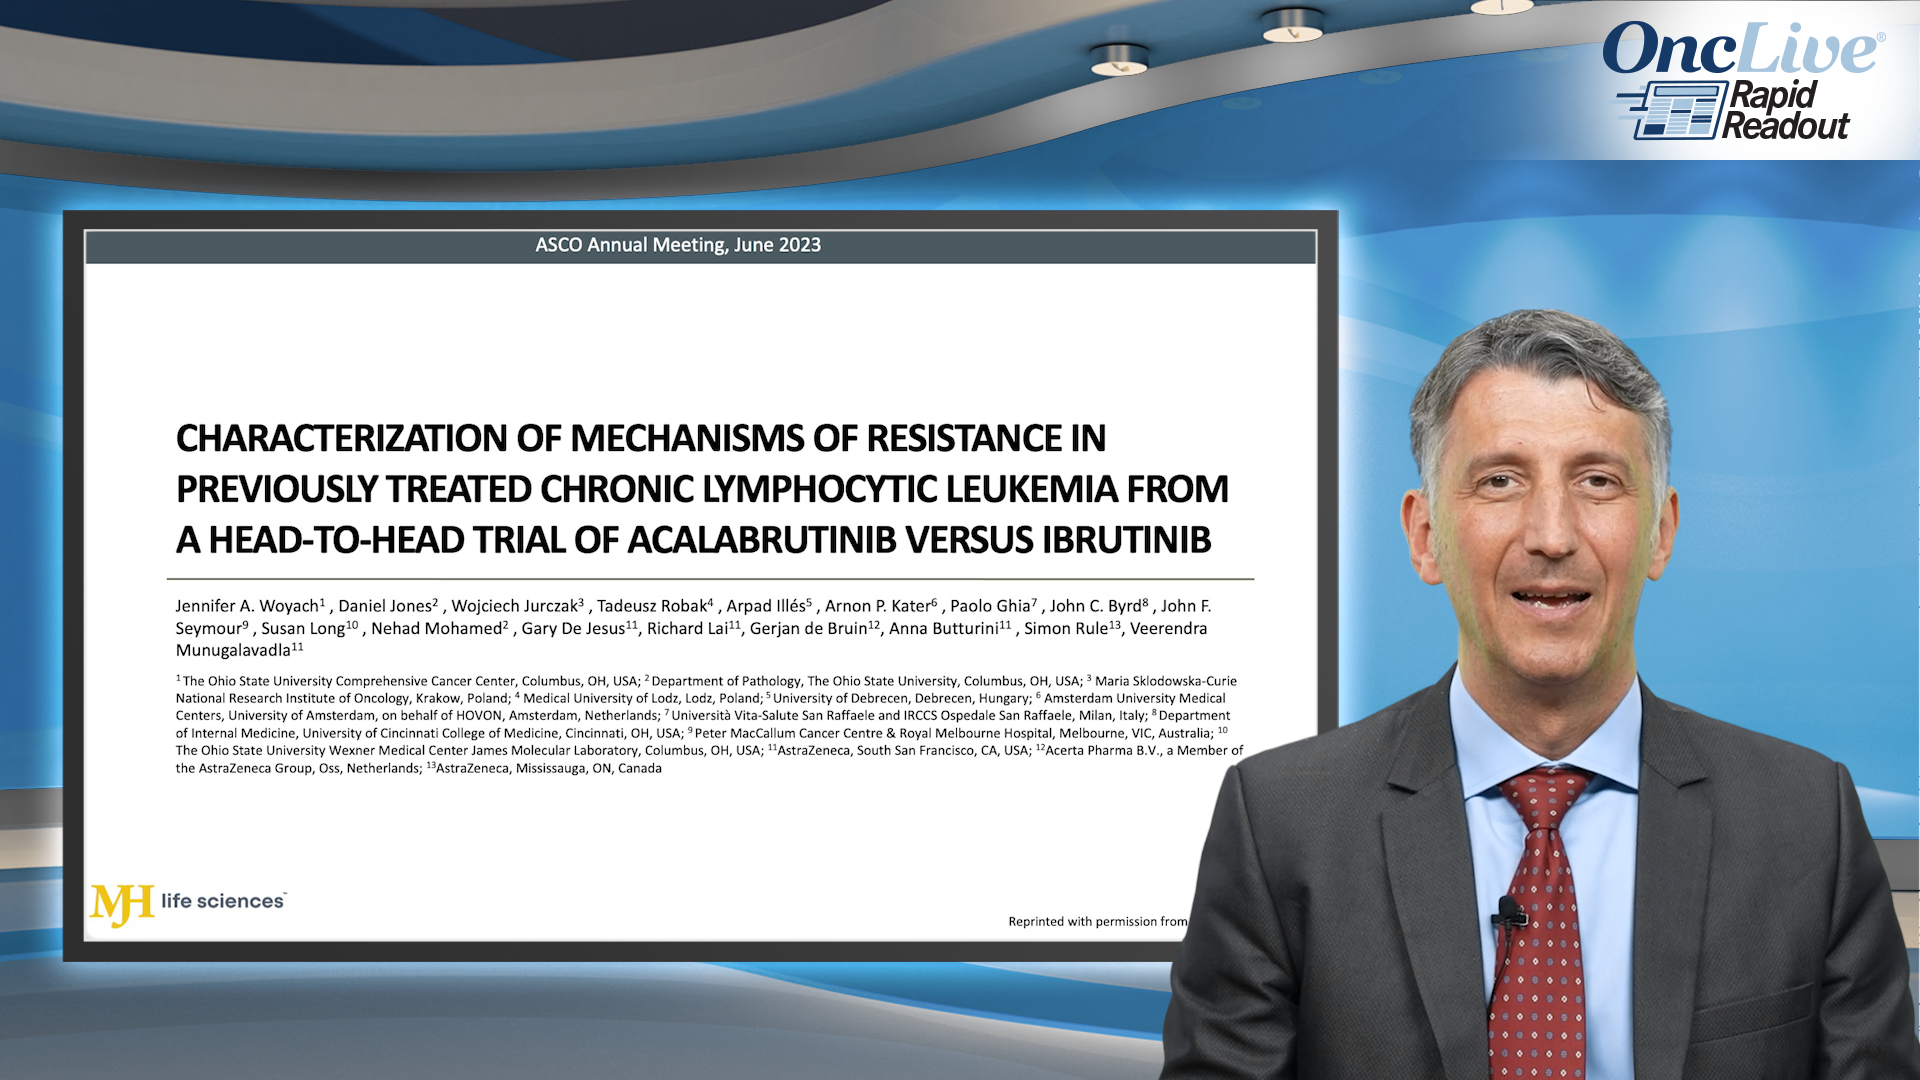 Characterization of Mechanisms of Resistance in Previously Treated Chronic Lymphocytic Leukemia From a Head-to-Head Trial of Acalabrutinib Versus Ibrutinib